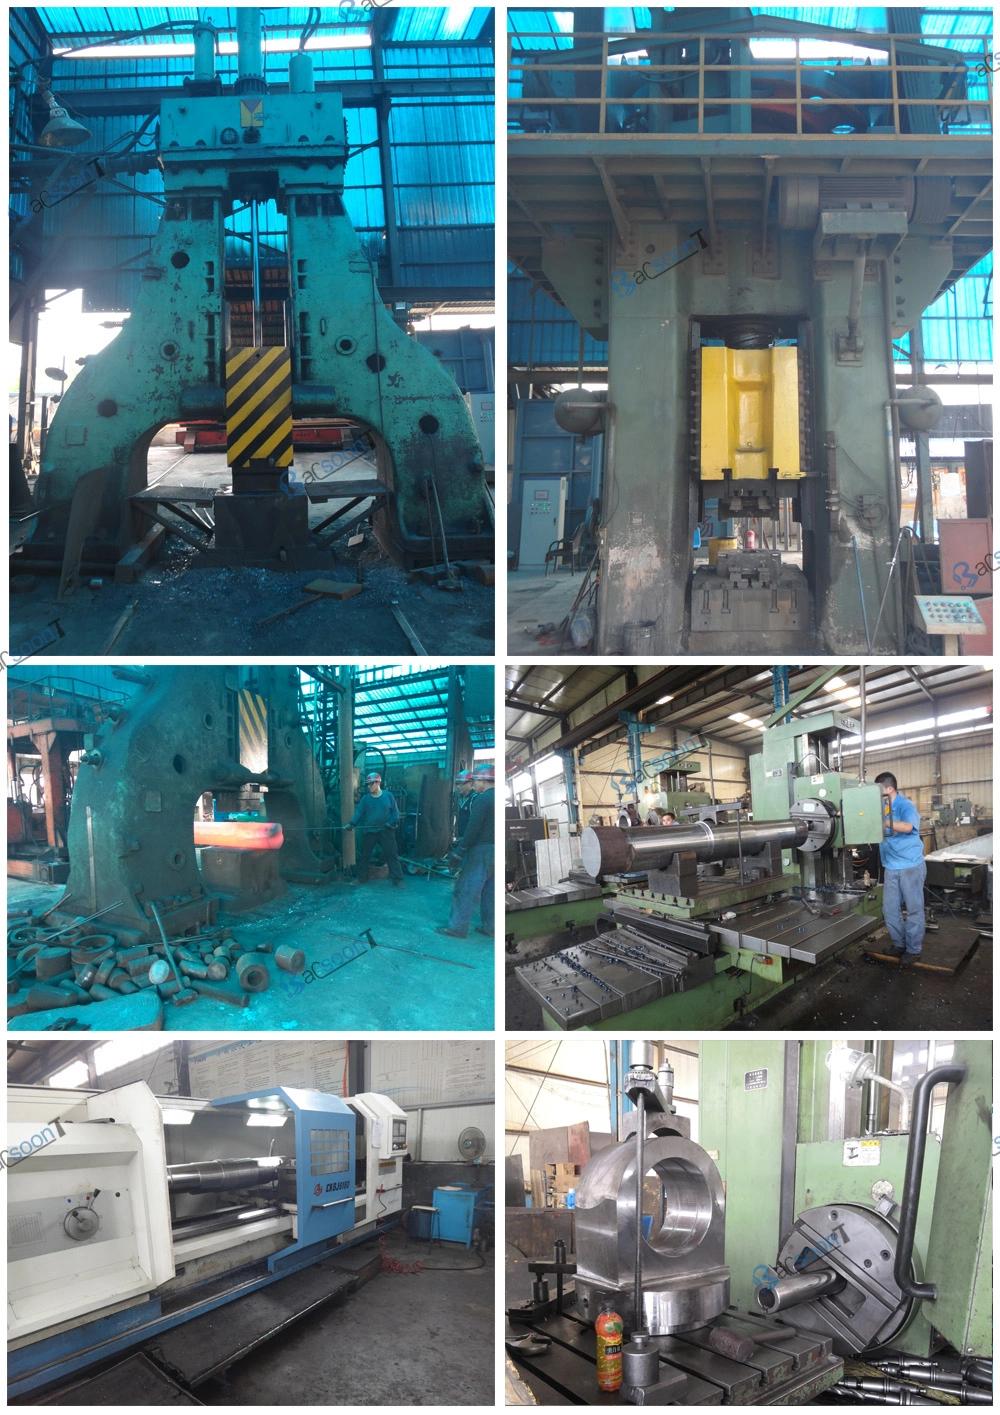 Steel Alloy Forged/Forging Shaft with Normalizing and Tempering Made in China